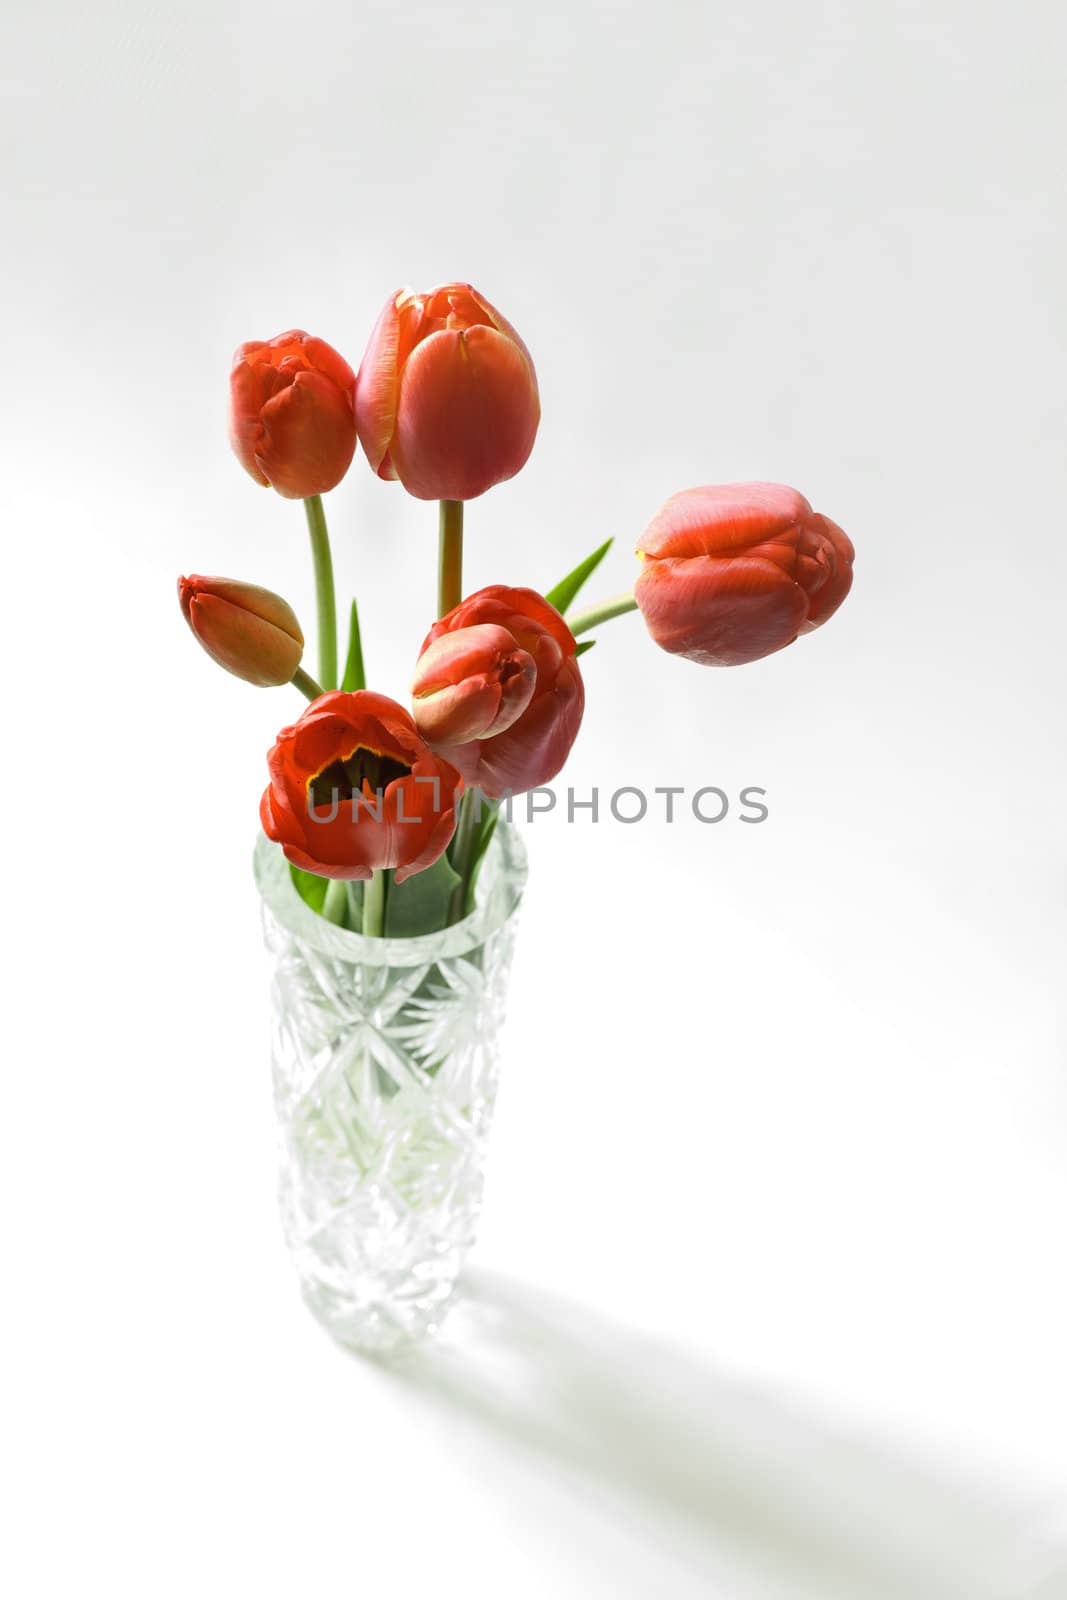 Red tulips by mulden